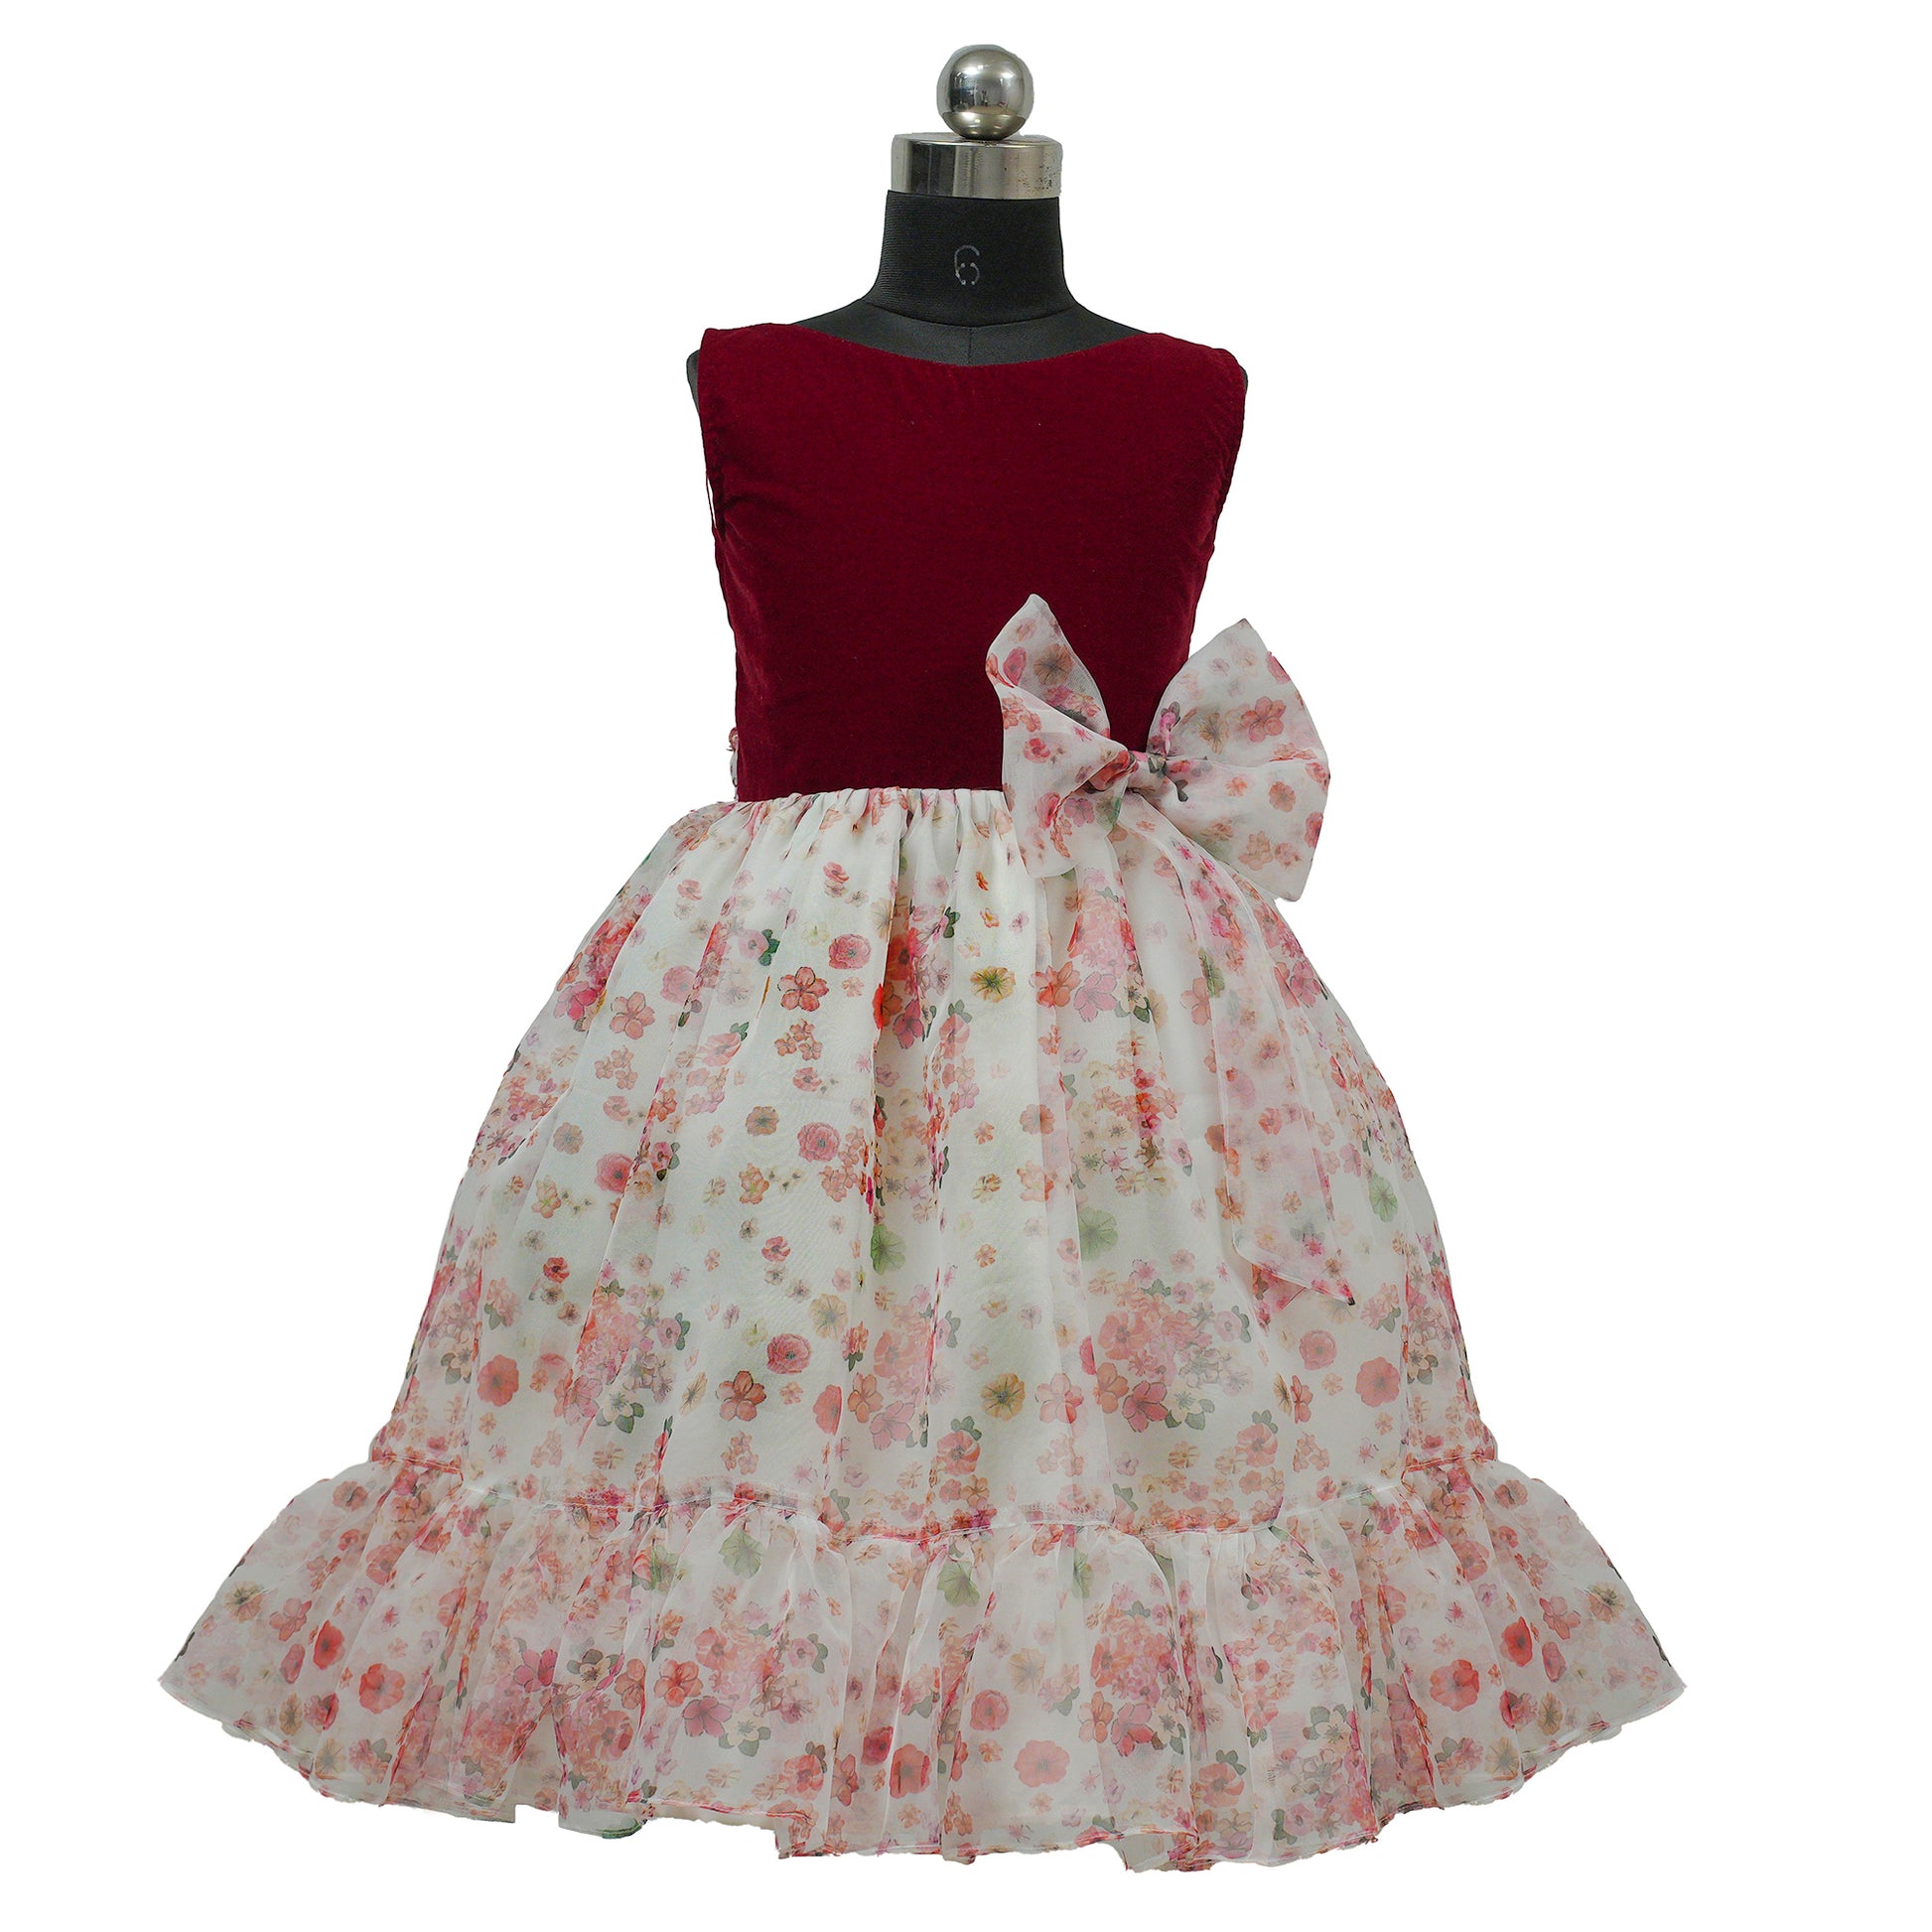 Best Buy New fashion Frock Designer Christmas Dresses for Girls New Arrivals in Kids' Fashion Cute Christmas Outfits Top Online Retailers for Kids' Fashion Exclusive Holiday Dress Deals  Unique Designer Girls Party Collection velvet & printed organza Designer Christmas Dresses for Girls